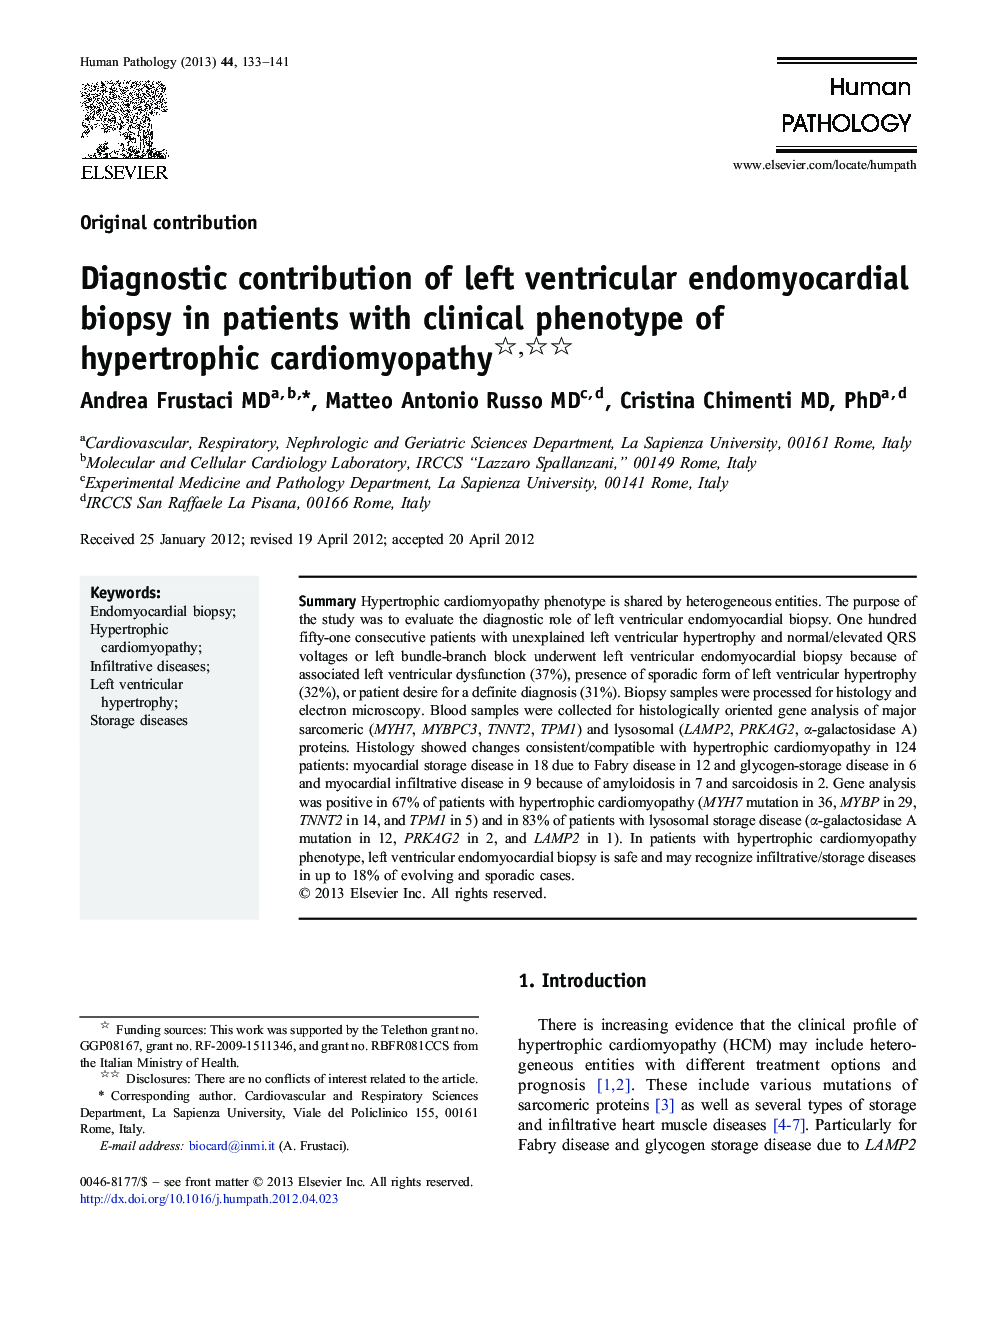 Diagnostic contribution of left ventricular endomyocardial biopsy in patients with clinical phenotype of hypertrophic cardiomyopathy 